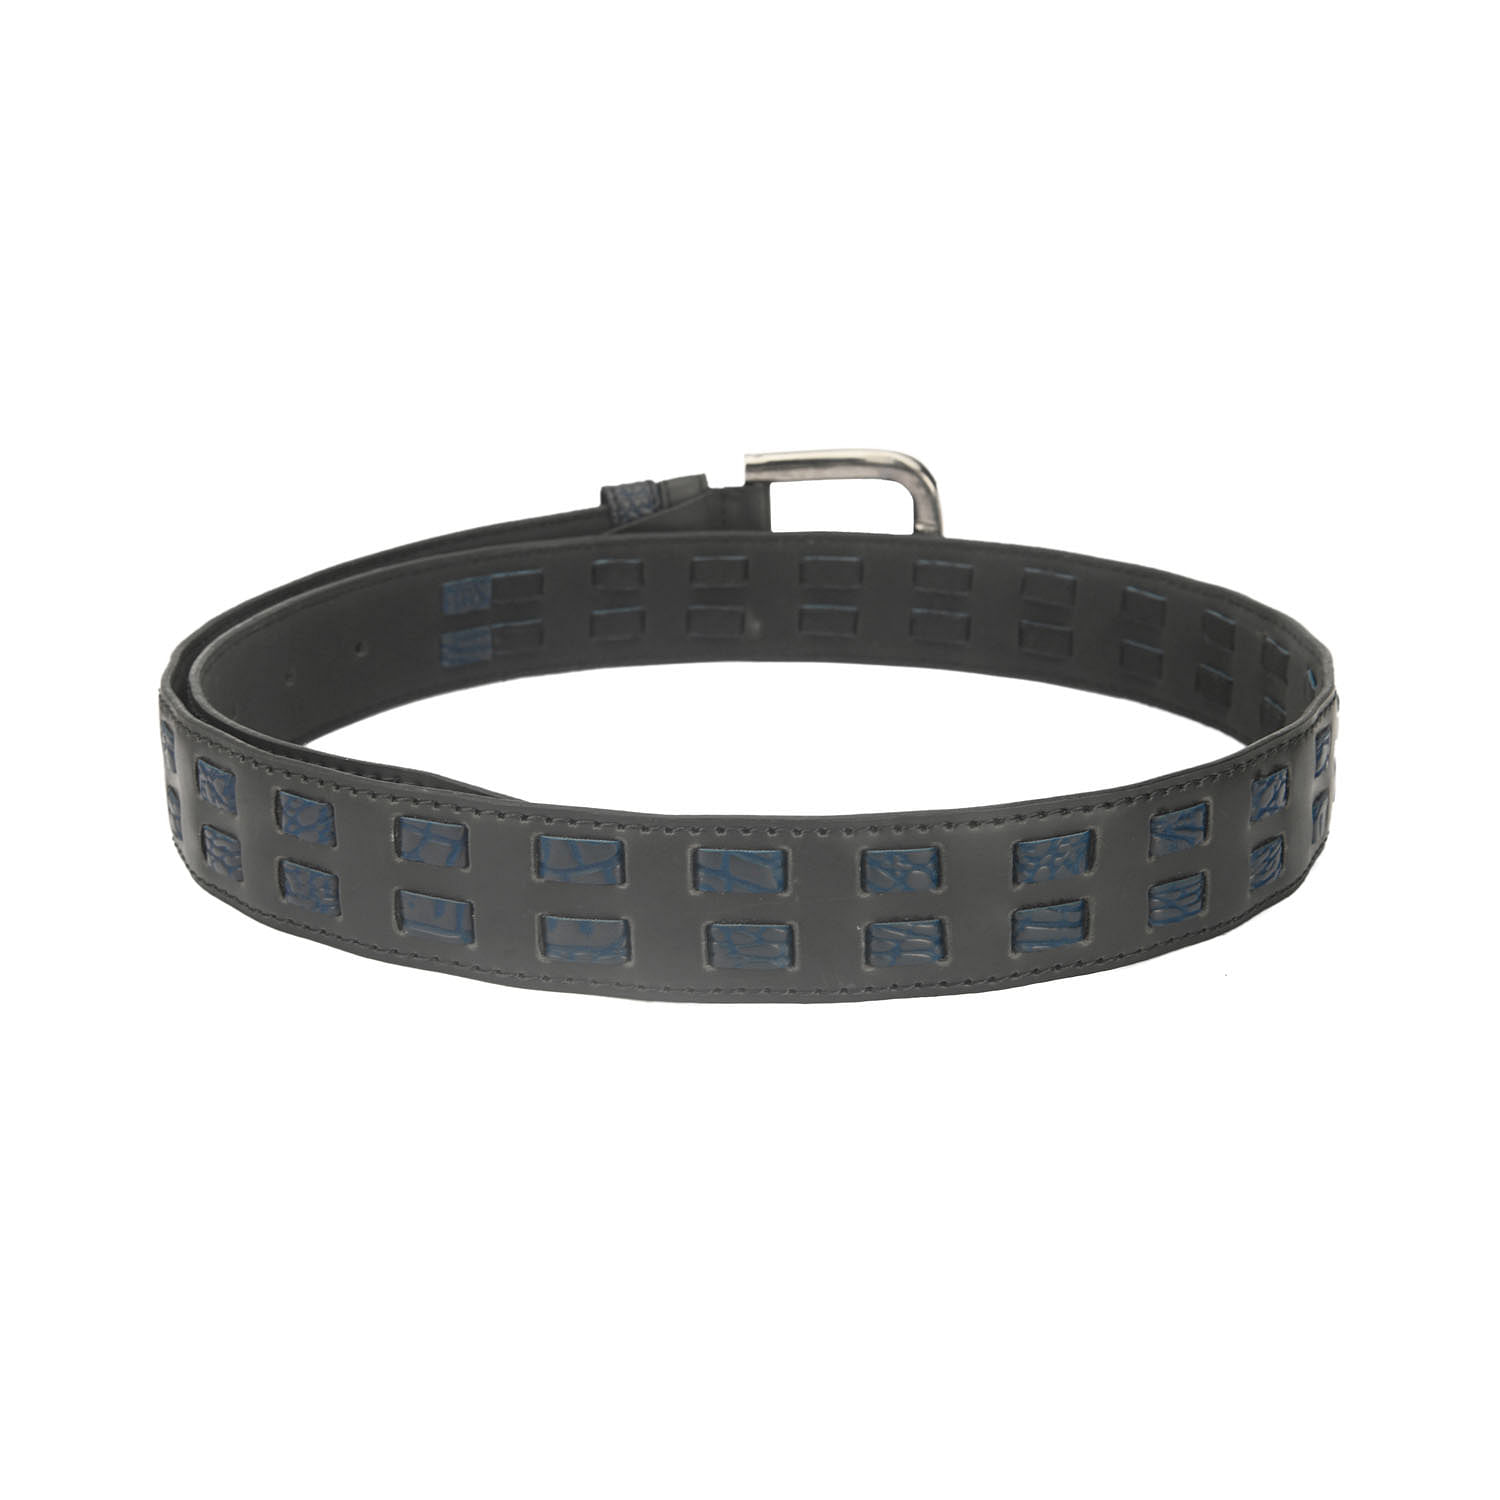 Men's Casual Textured Perforated Belt Black - LZ-CB-102